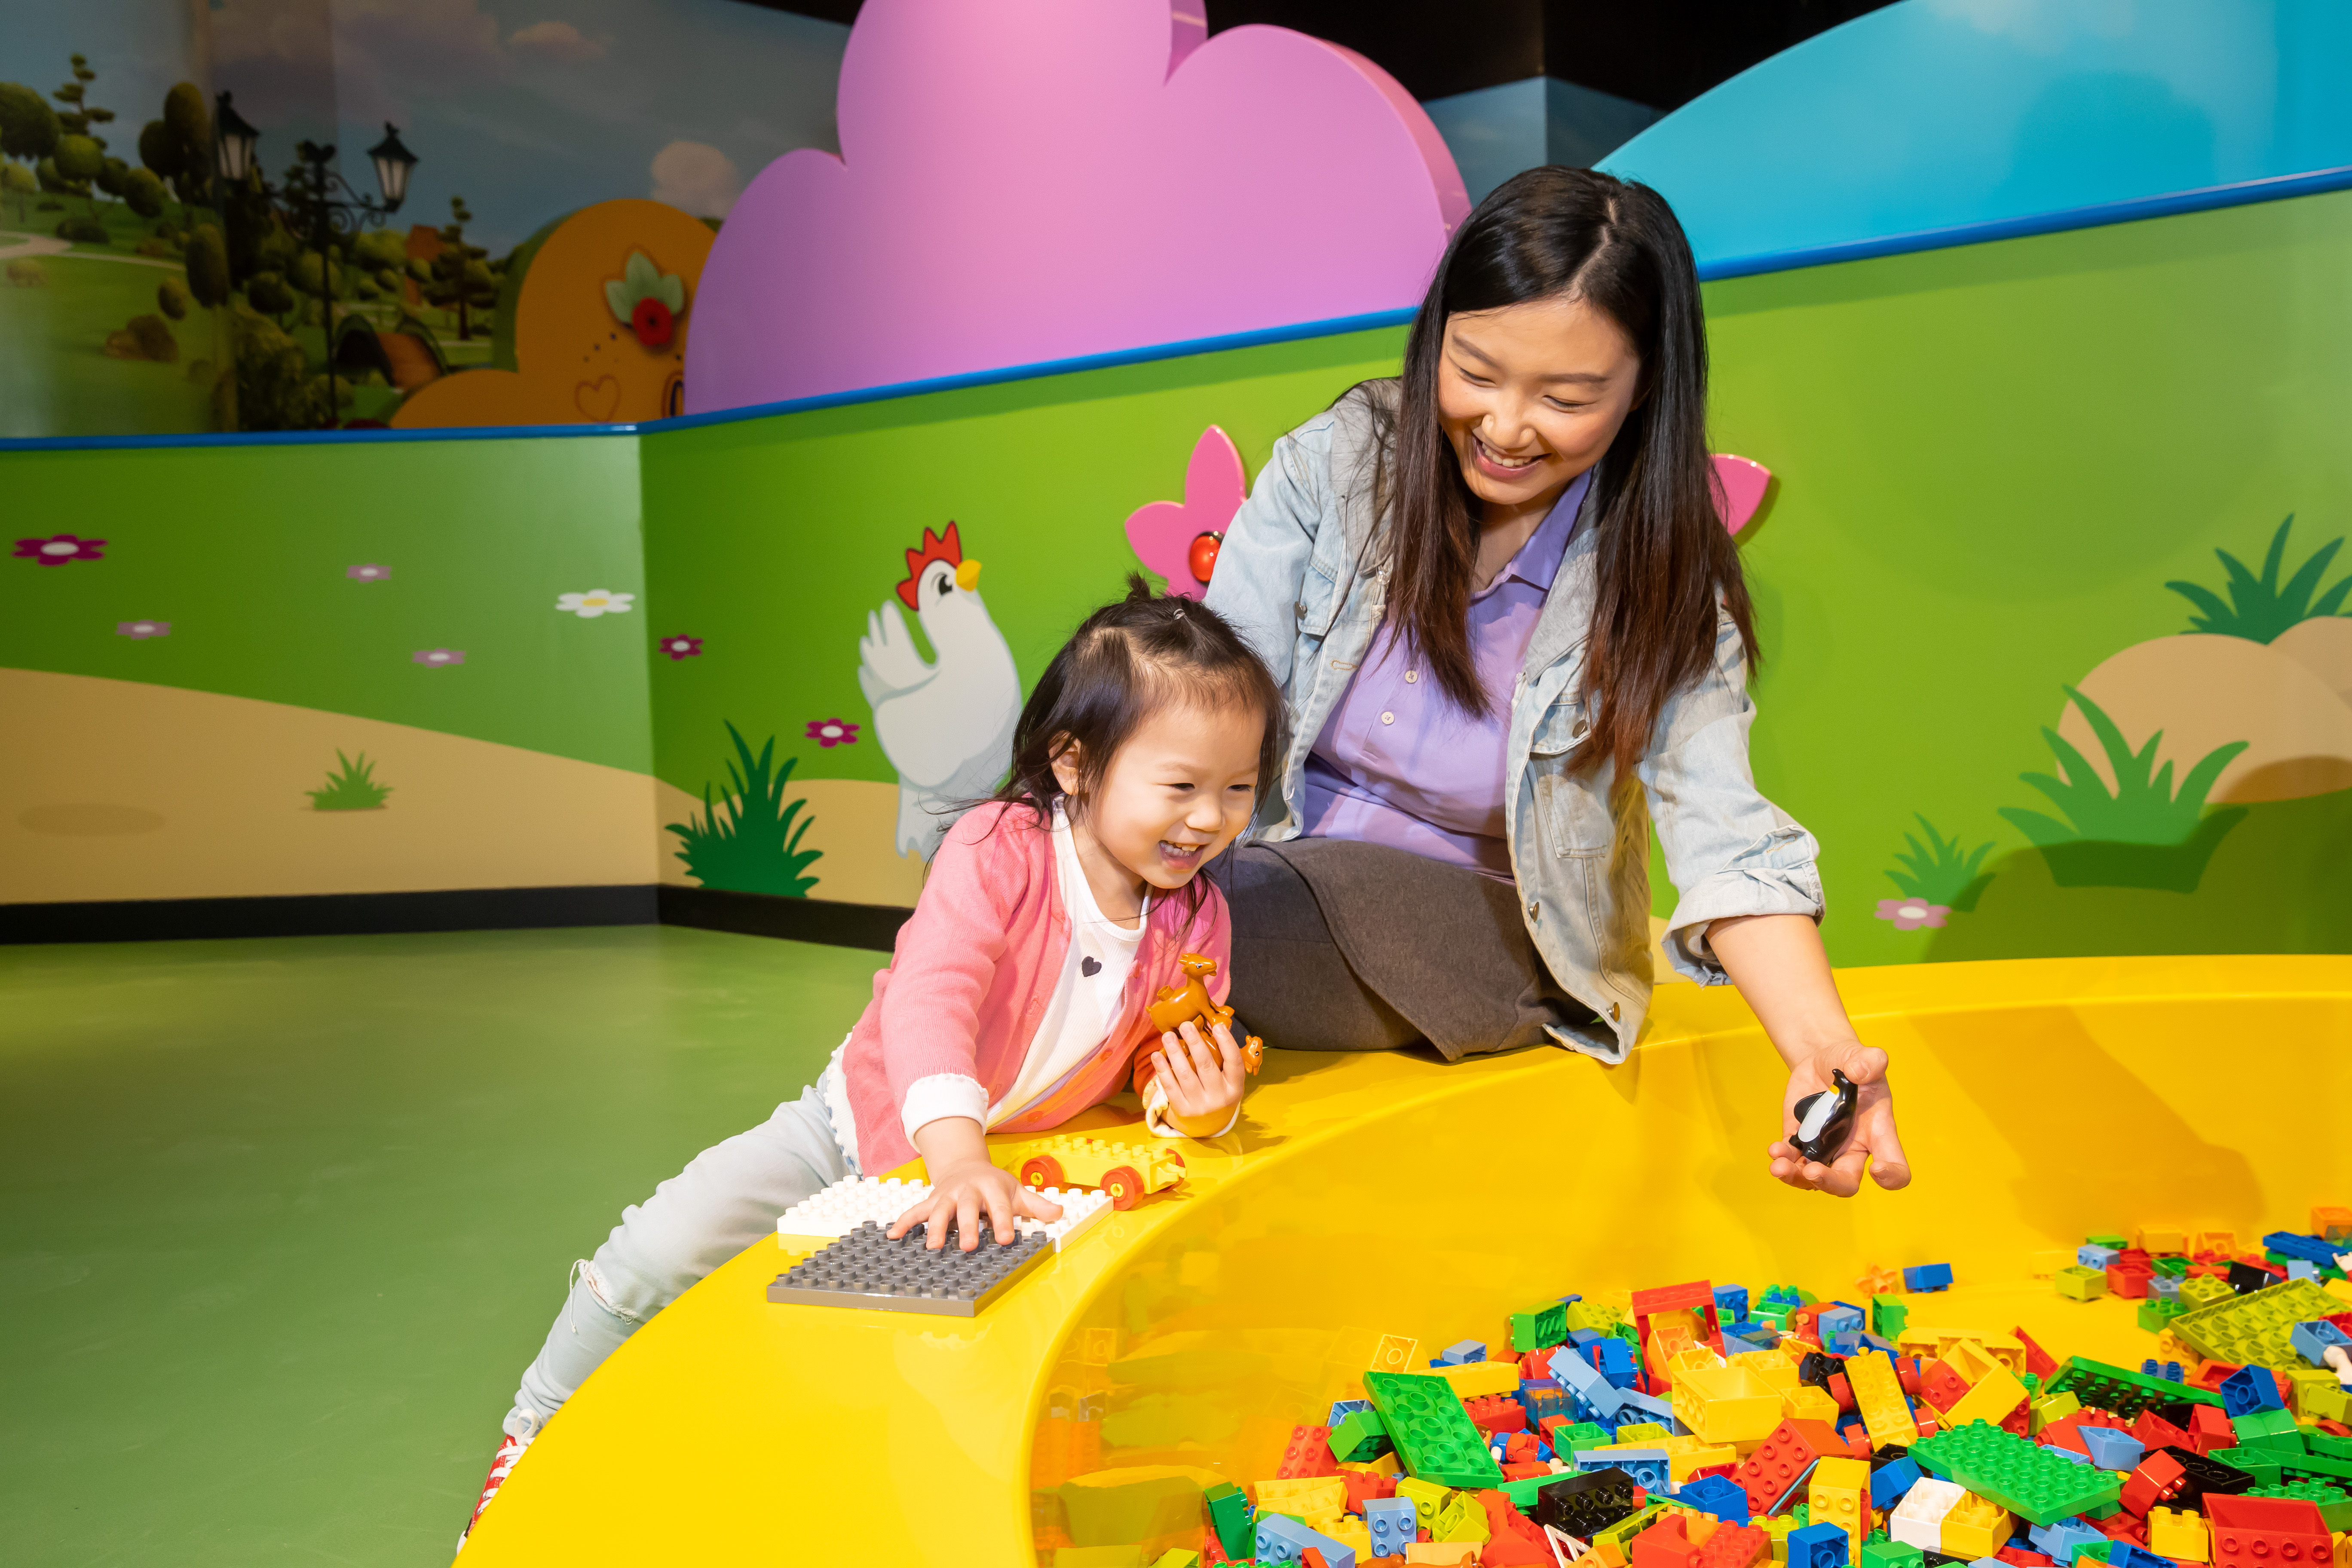 DUPLO® FARM at Legoland Discovery Center Hong Kong, where little builders can let their imaginations run wild